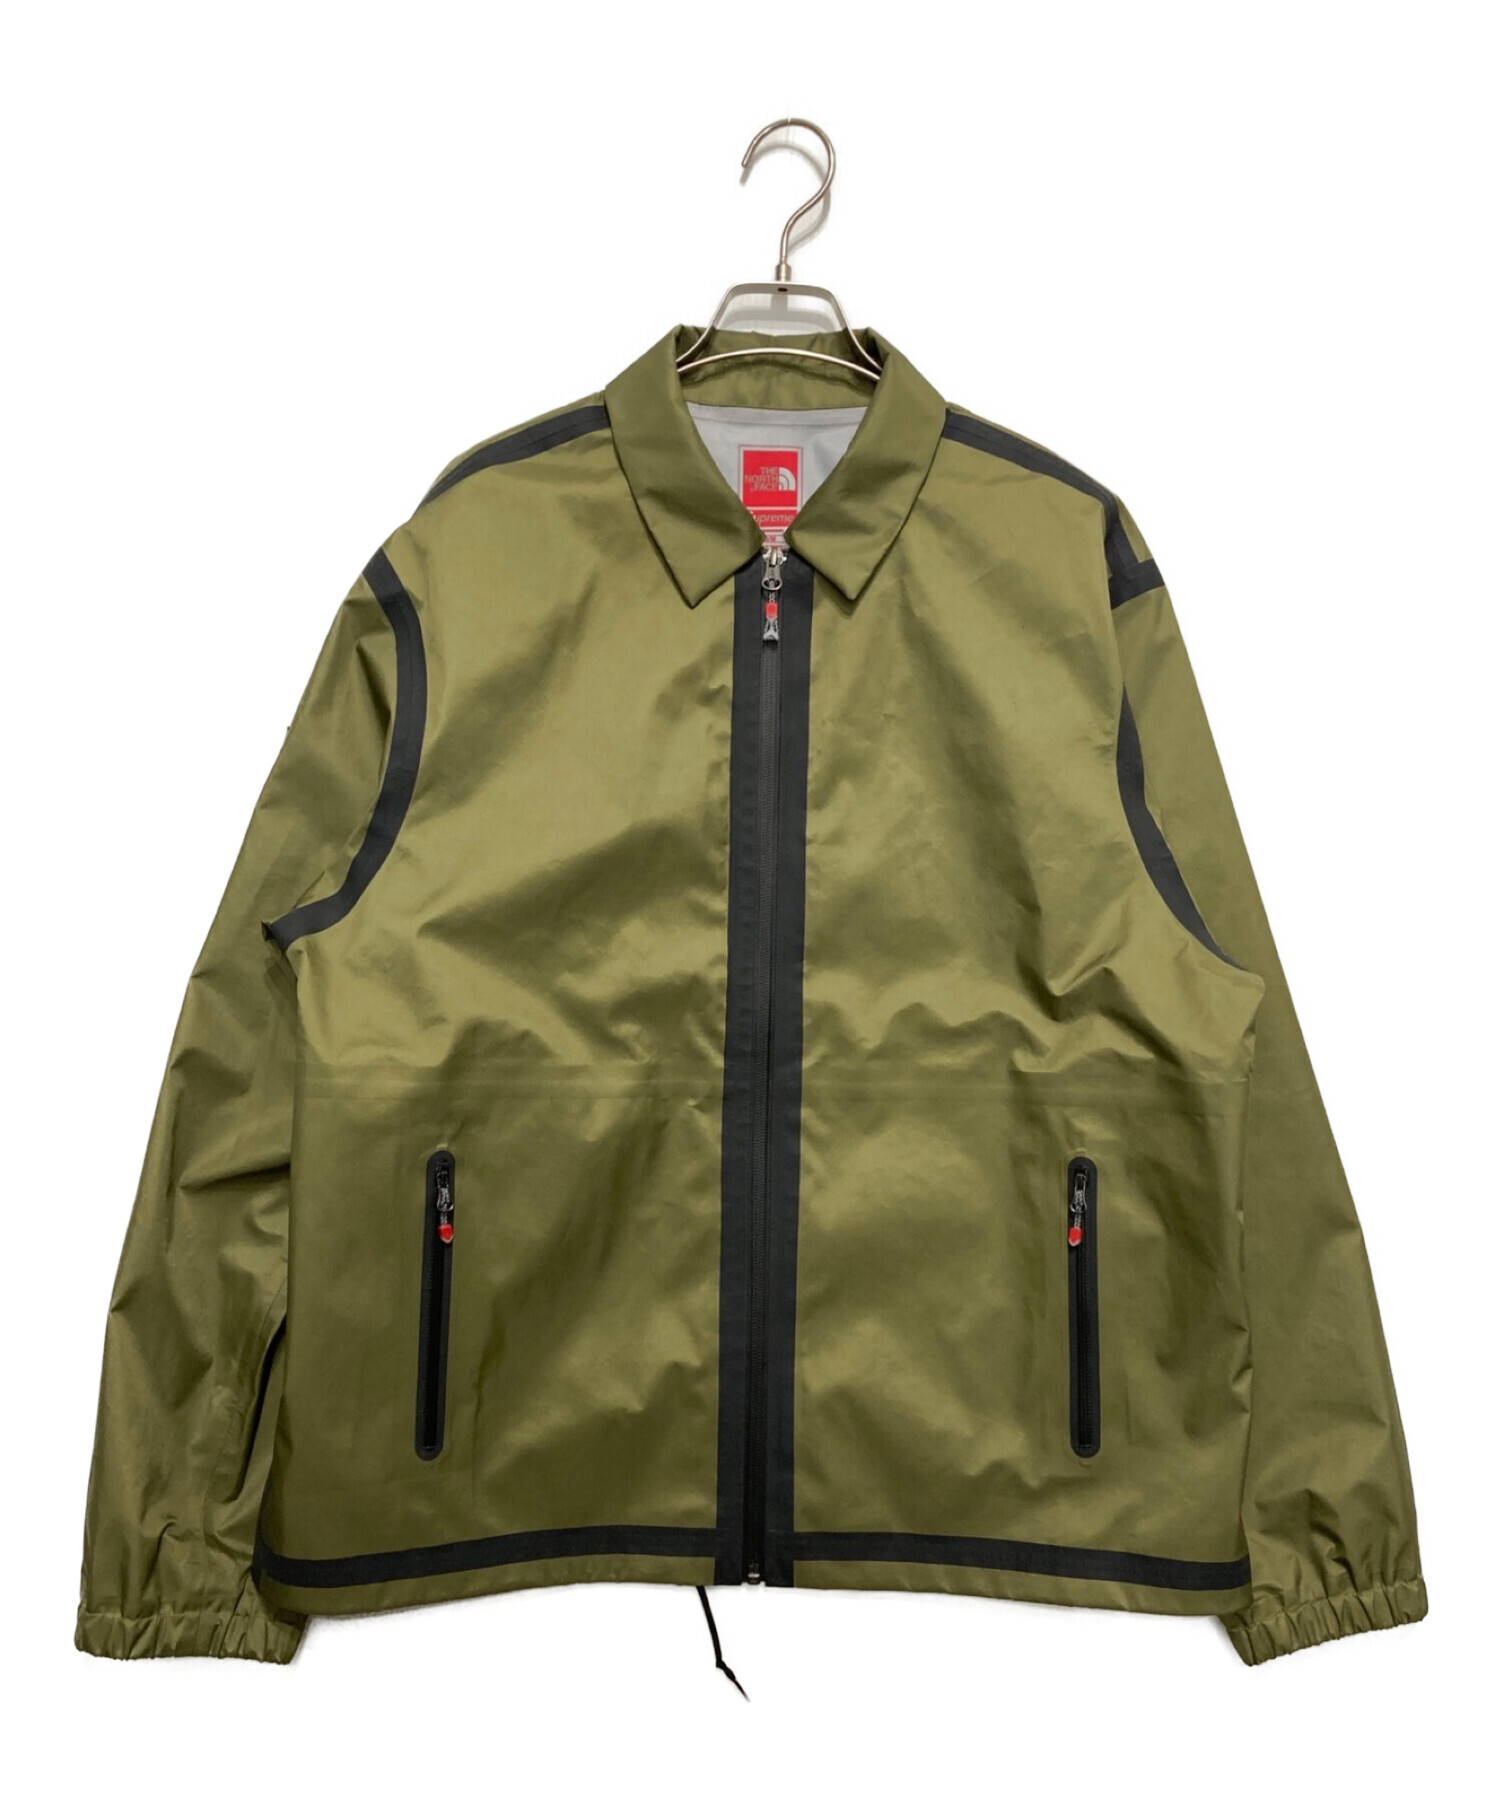 Supreme The North Face Coaches Jacketお求めの方どうぞ